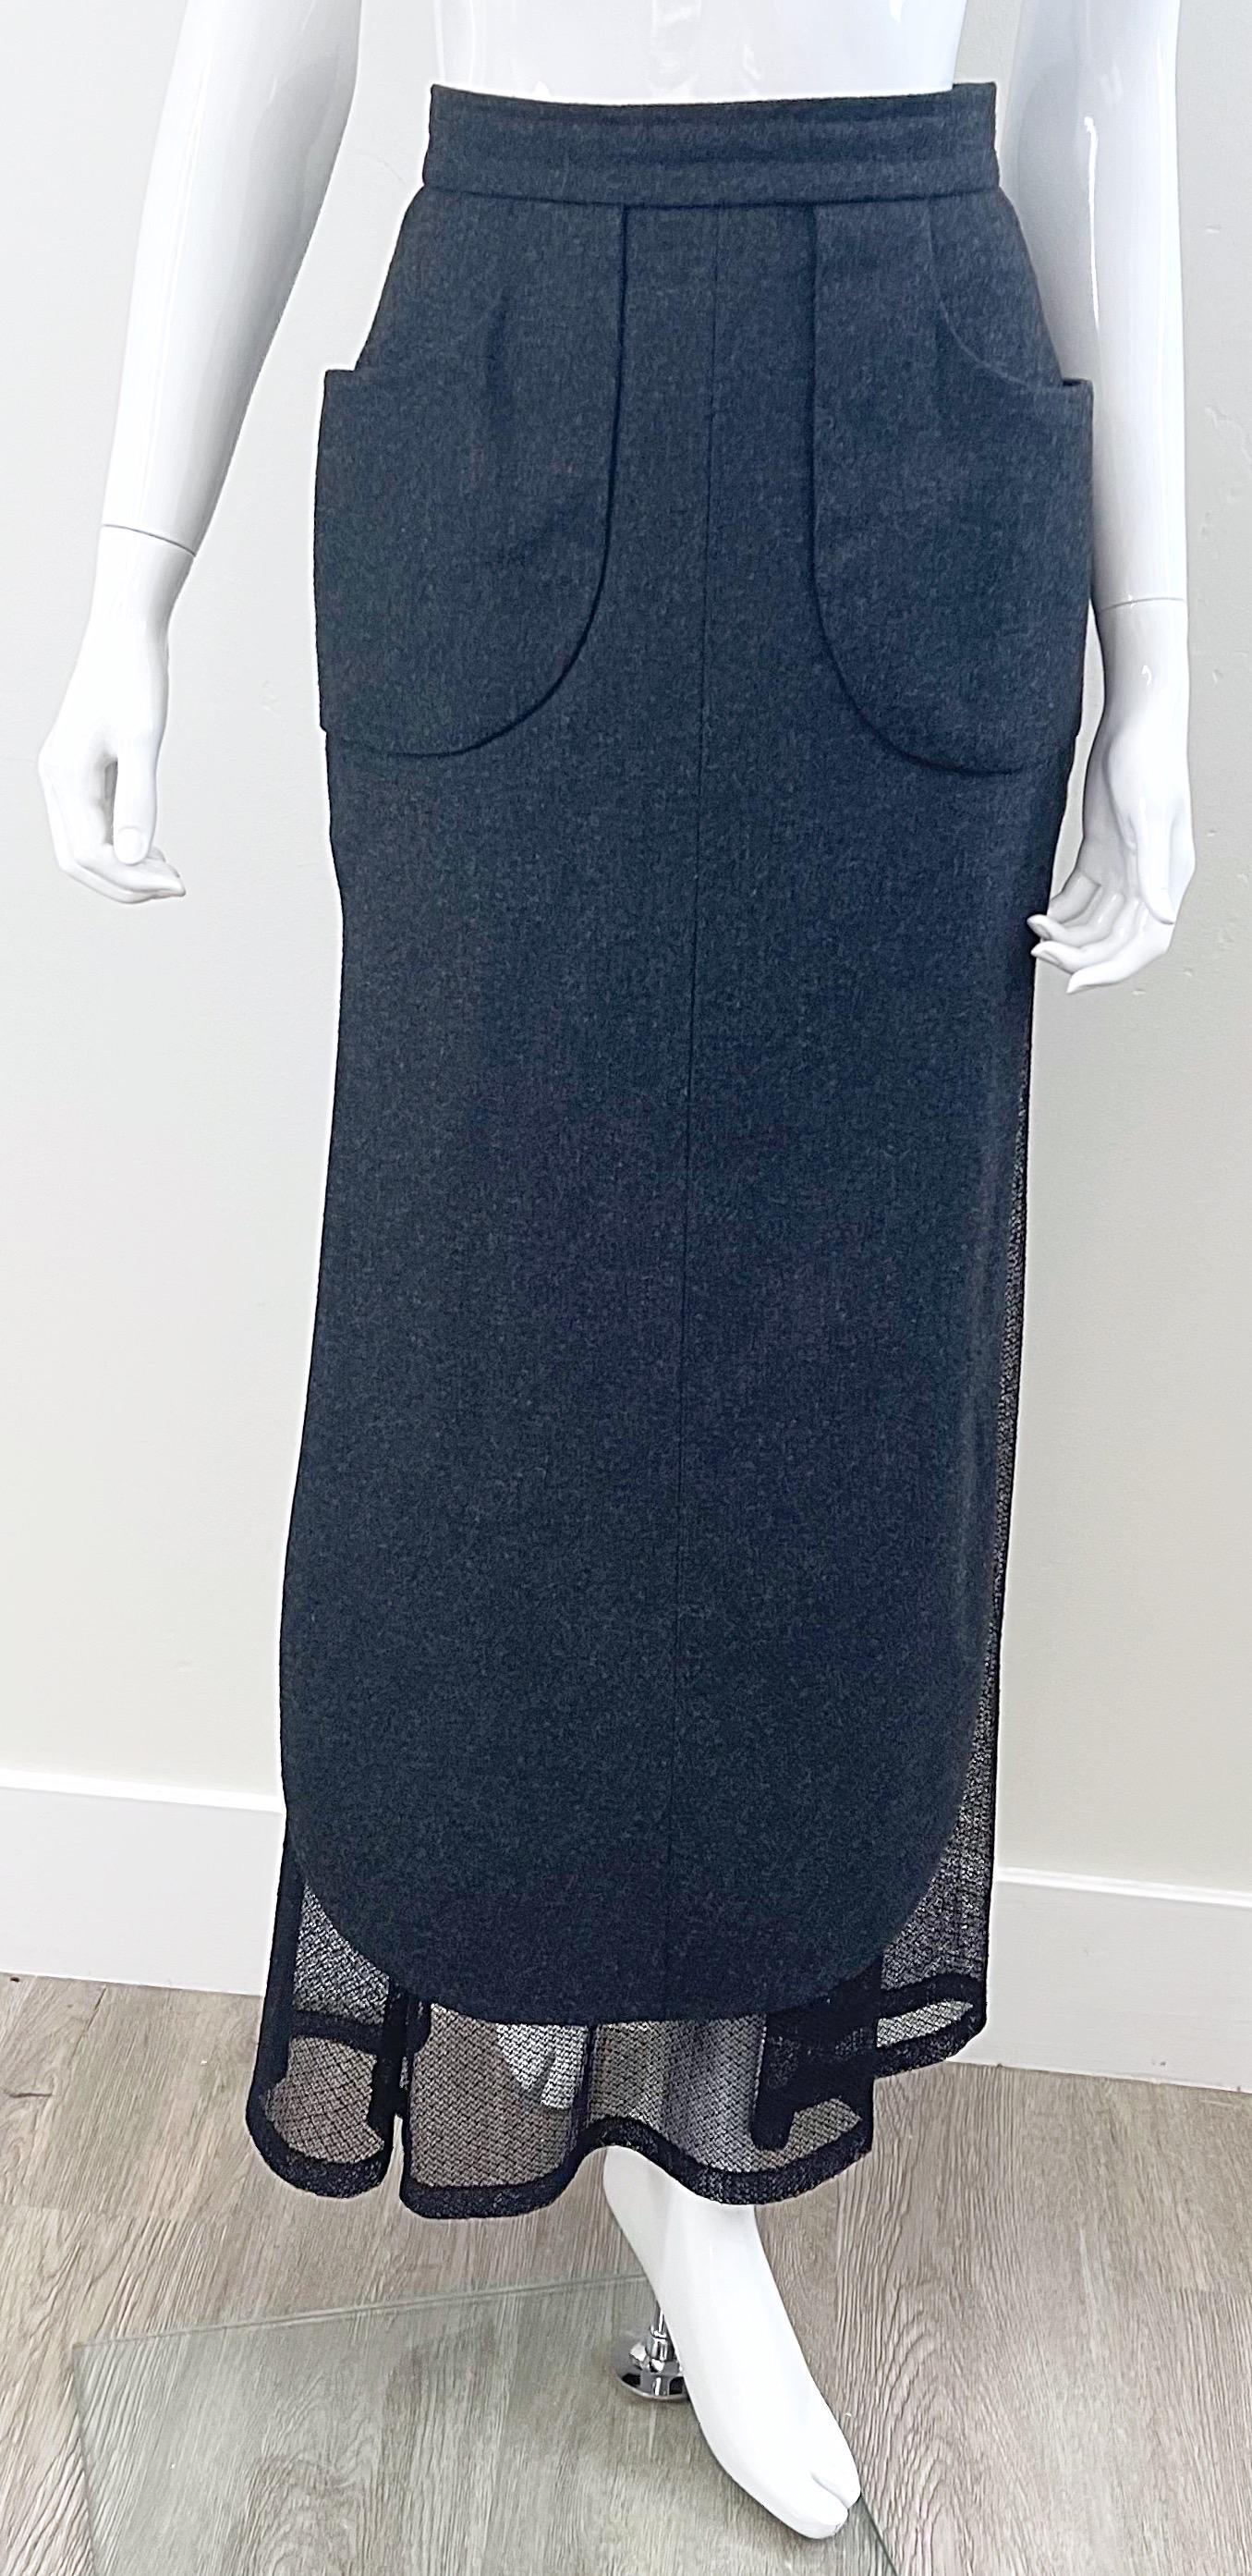 Karl Lagerfeld 1980s Grey Wool + Black Lace Vintage 80s Mini Maxi Skirt For Sale 13